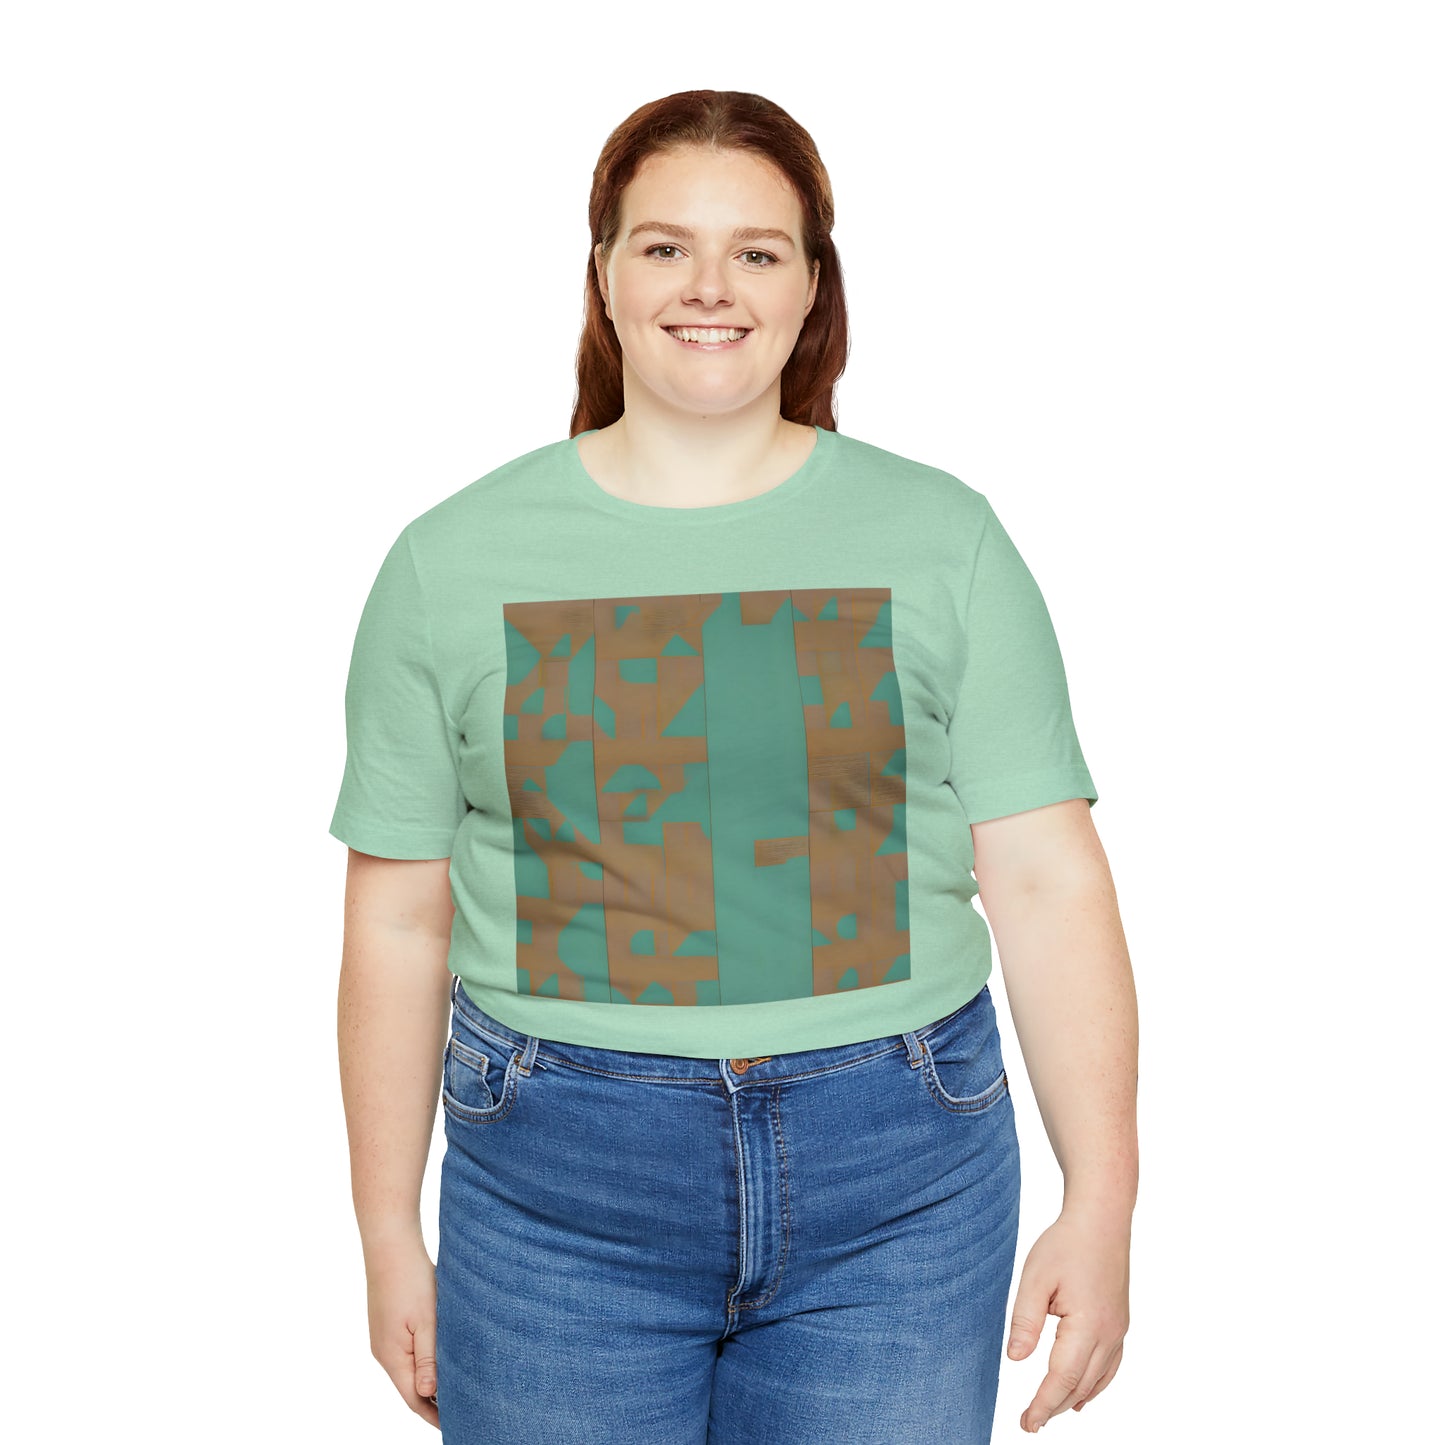 ABSTRACT SHAPES 103 - Unisex Jersey Short Sleeve Tee